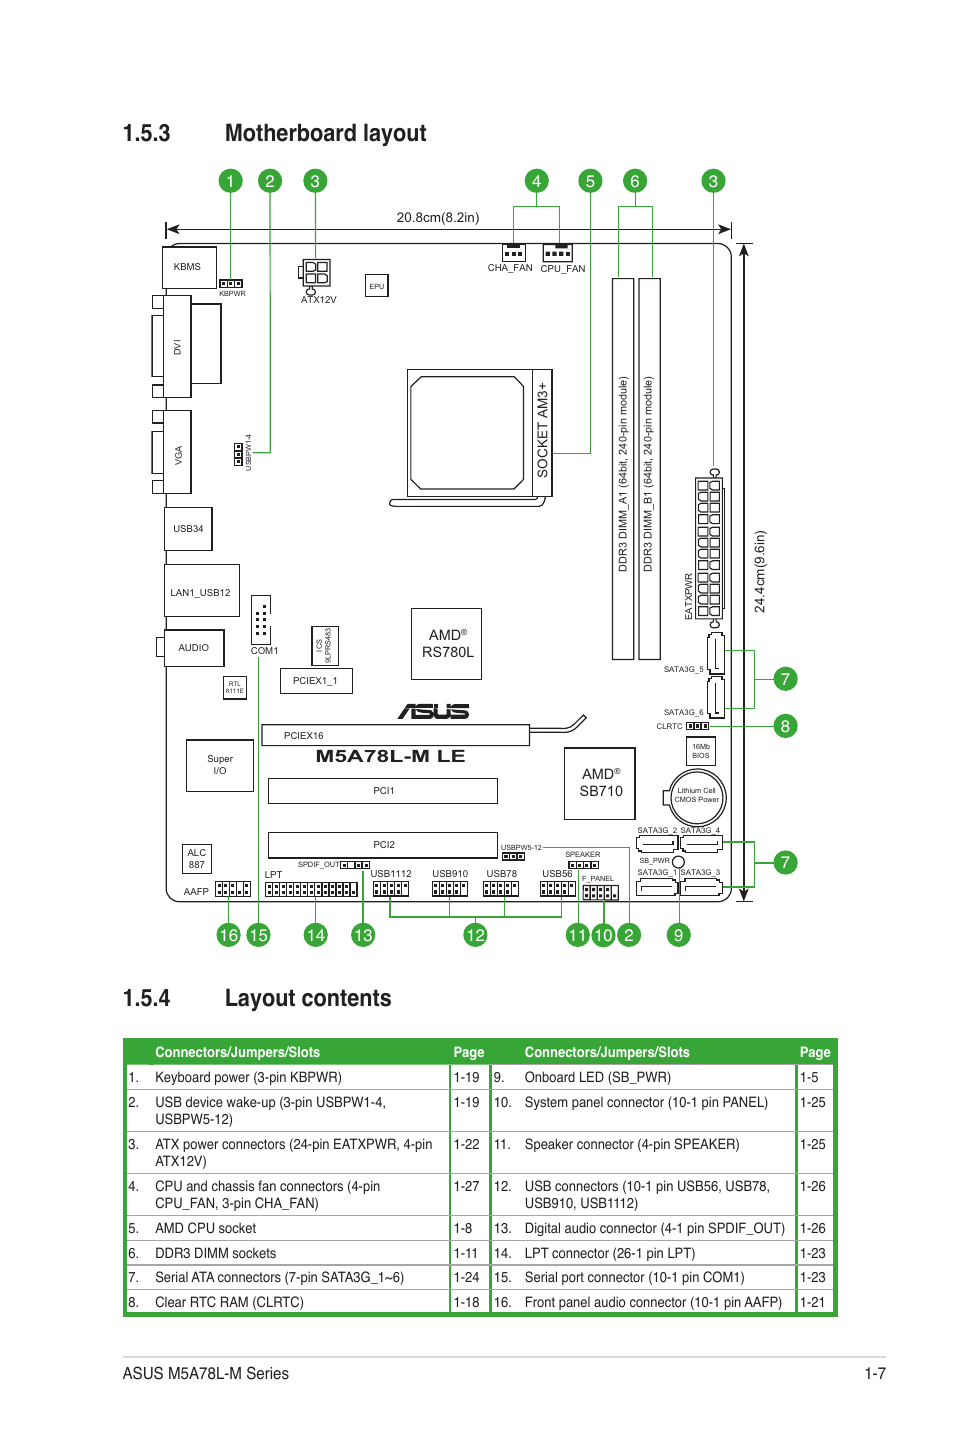 3 motherboard layout, 4 layout contents, Motherboard layout -7 | Asus